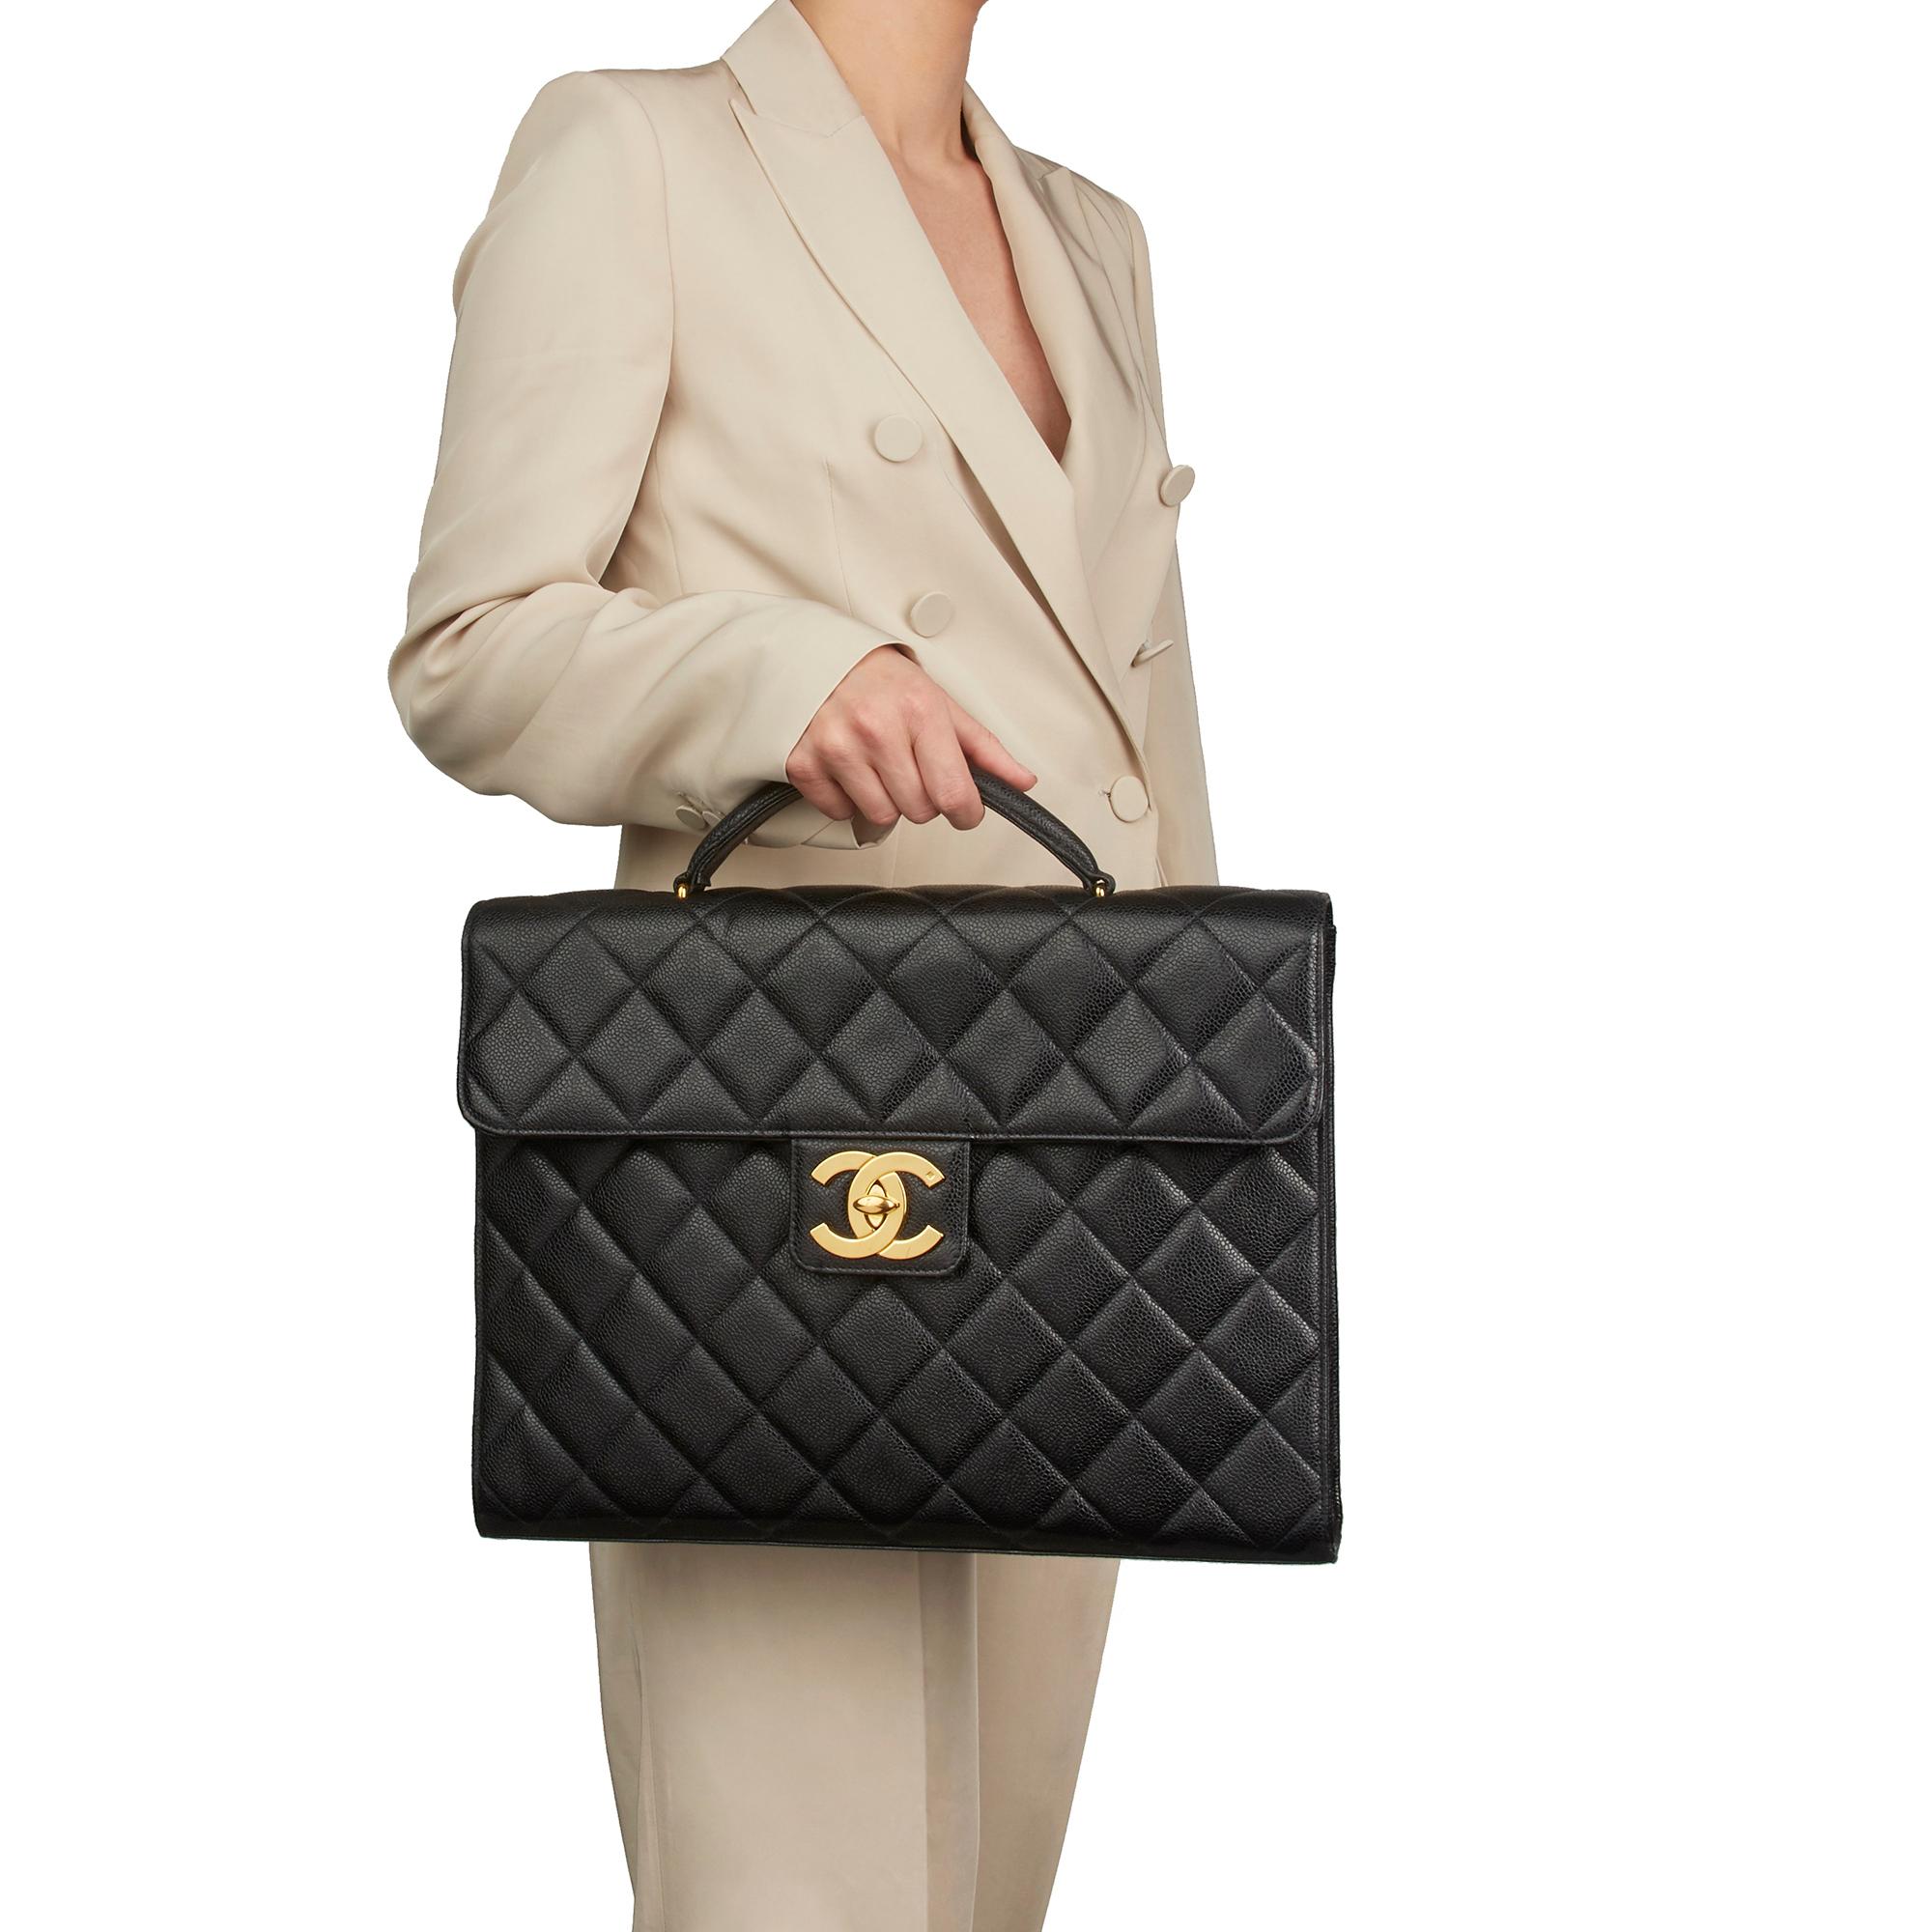 1994 Chanel Black Quilted Caviar Leather Jumbo XL Classic Briefcase 7